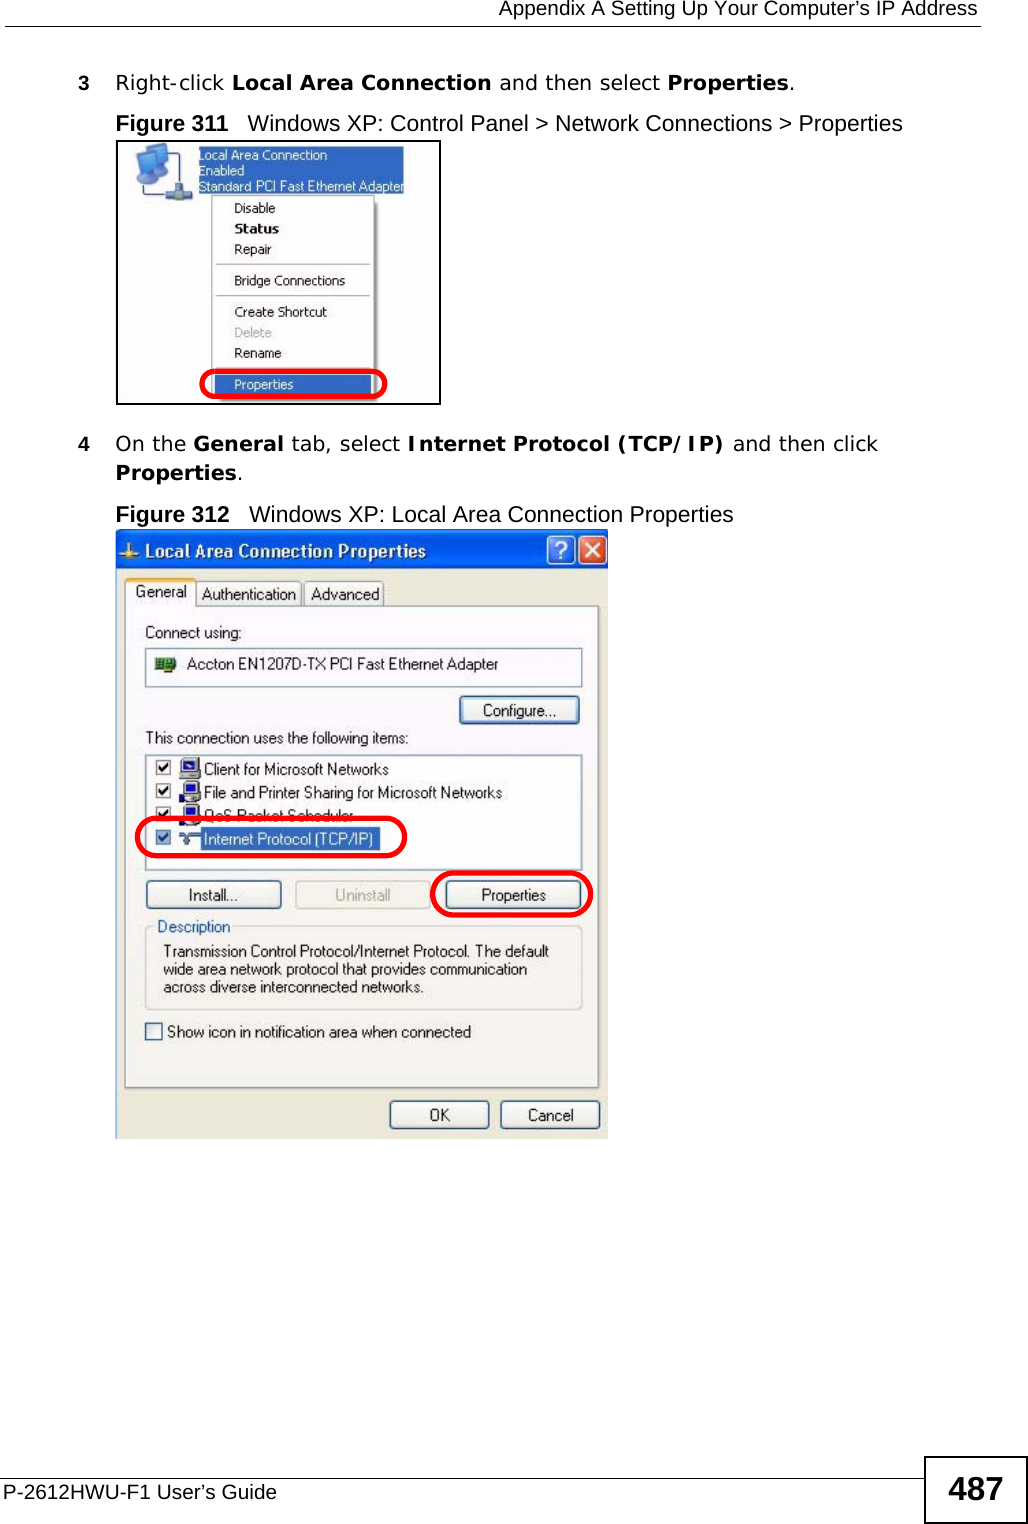  Appendix A Setting Up Your Computer’s IP AddressP-2612HWU-F1 User’s Guide 4873Right-click Local Area Connection and then select Properties.Figure 311   Windows XP: Control Panel &gt; Network Connections &gt; Properties4On the General tab, select Internet Protocol (TCP/IP) and then click Properties.Figure 312   Windows XP: Local Area Connection Properties